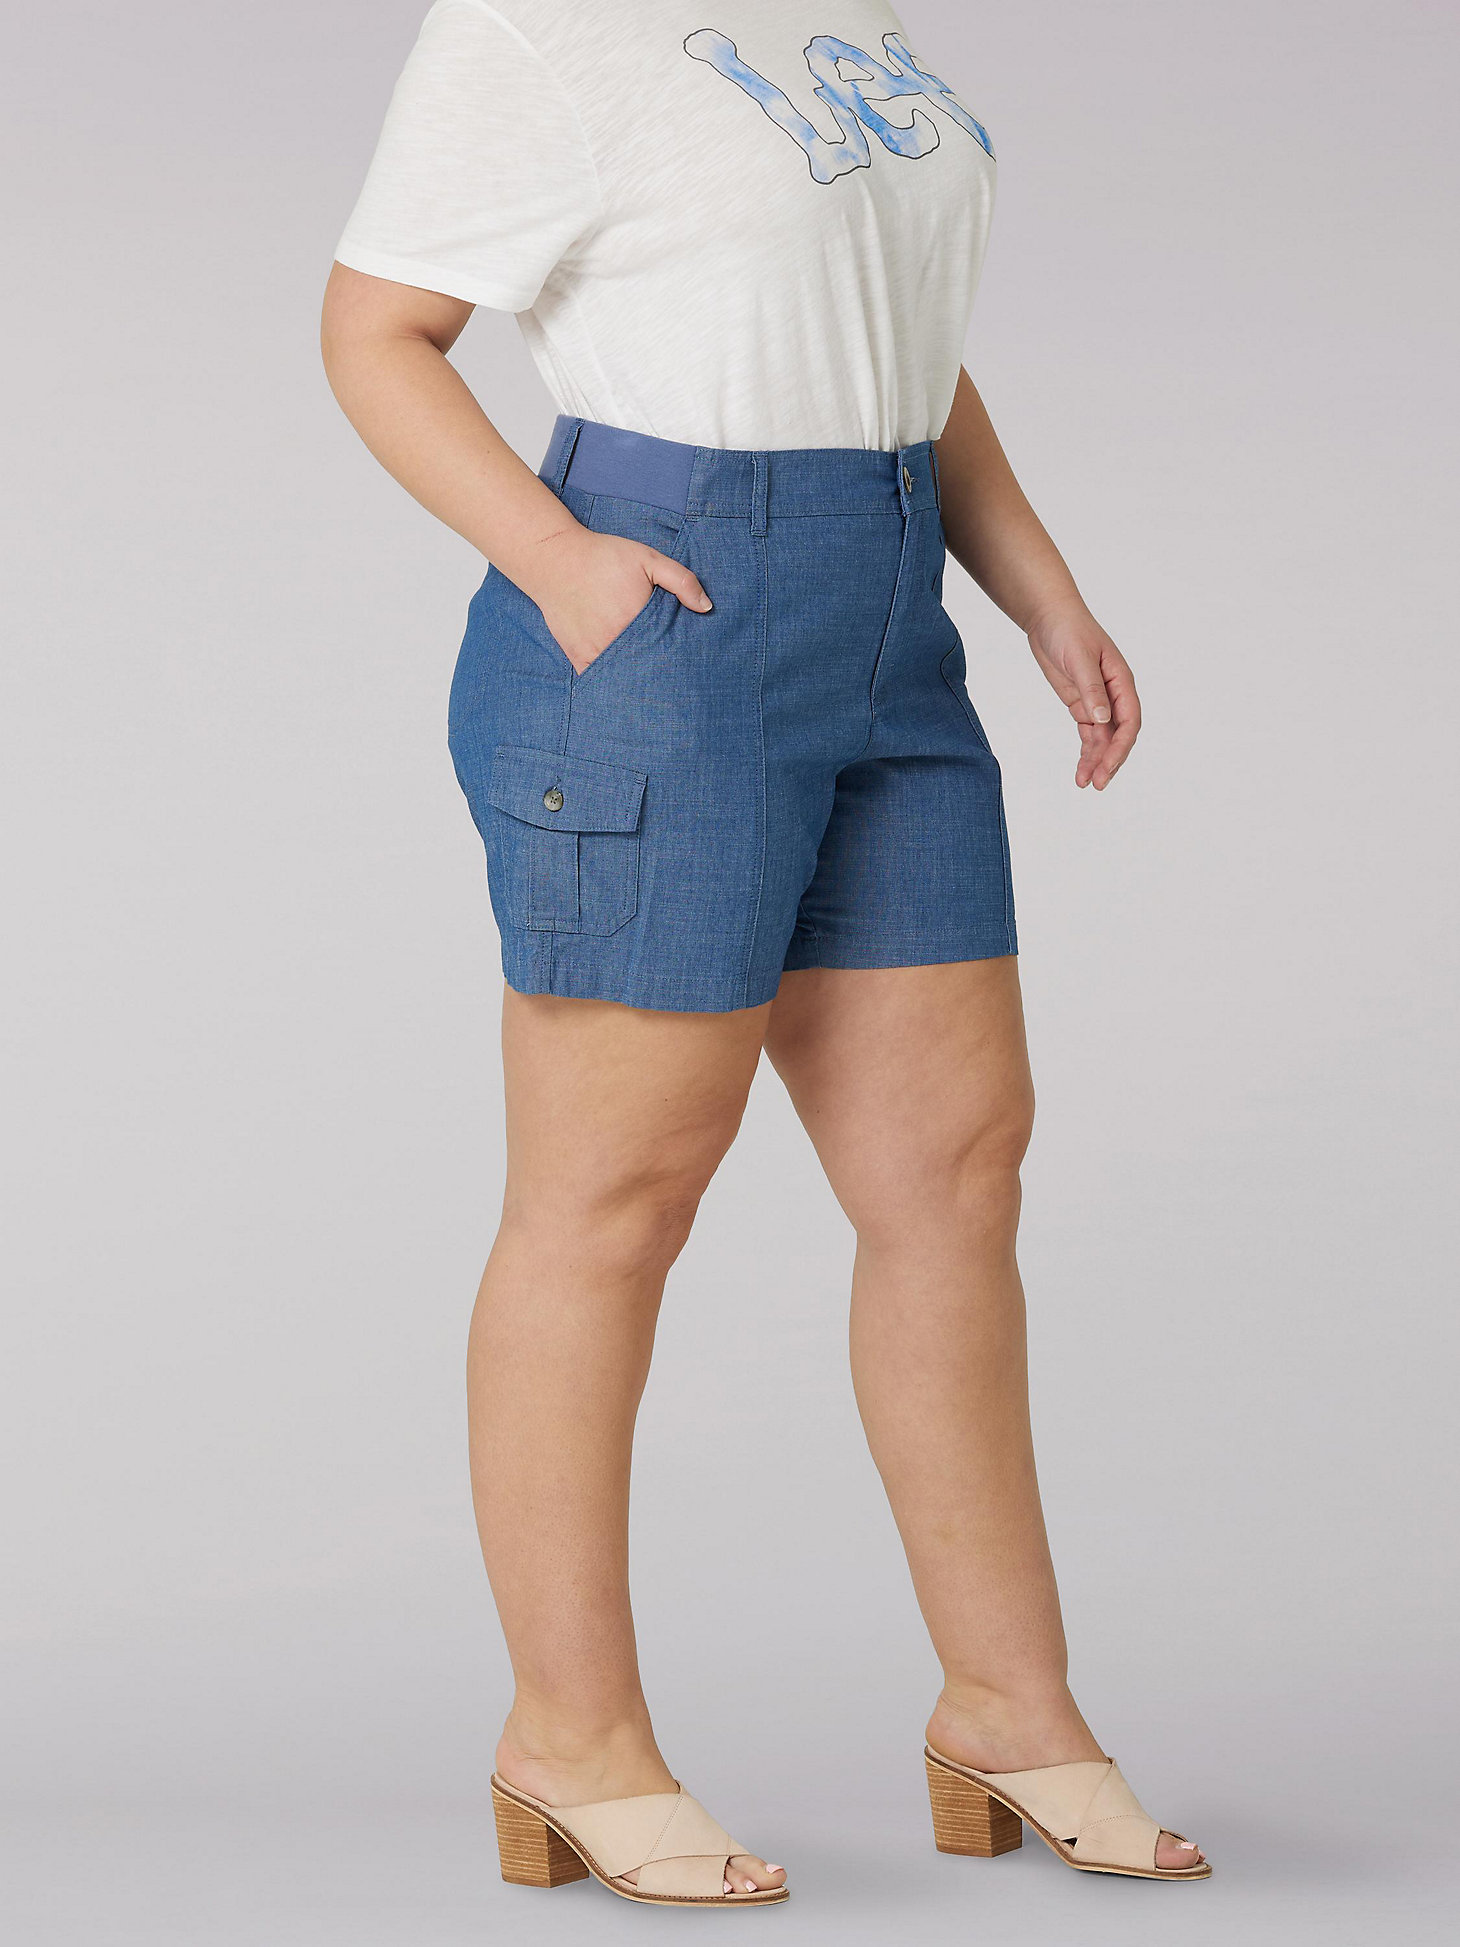 Women's Flex-to-Go Seamed Relaxed Fit Cargo Short (Plus) in Rinse Chanbray alternative view 2